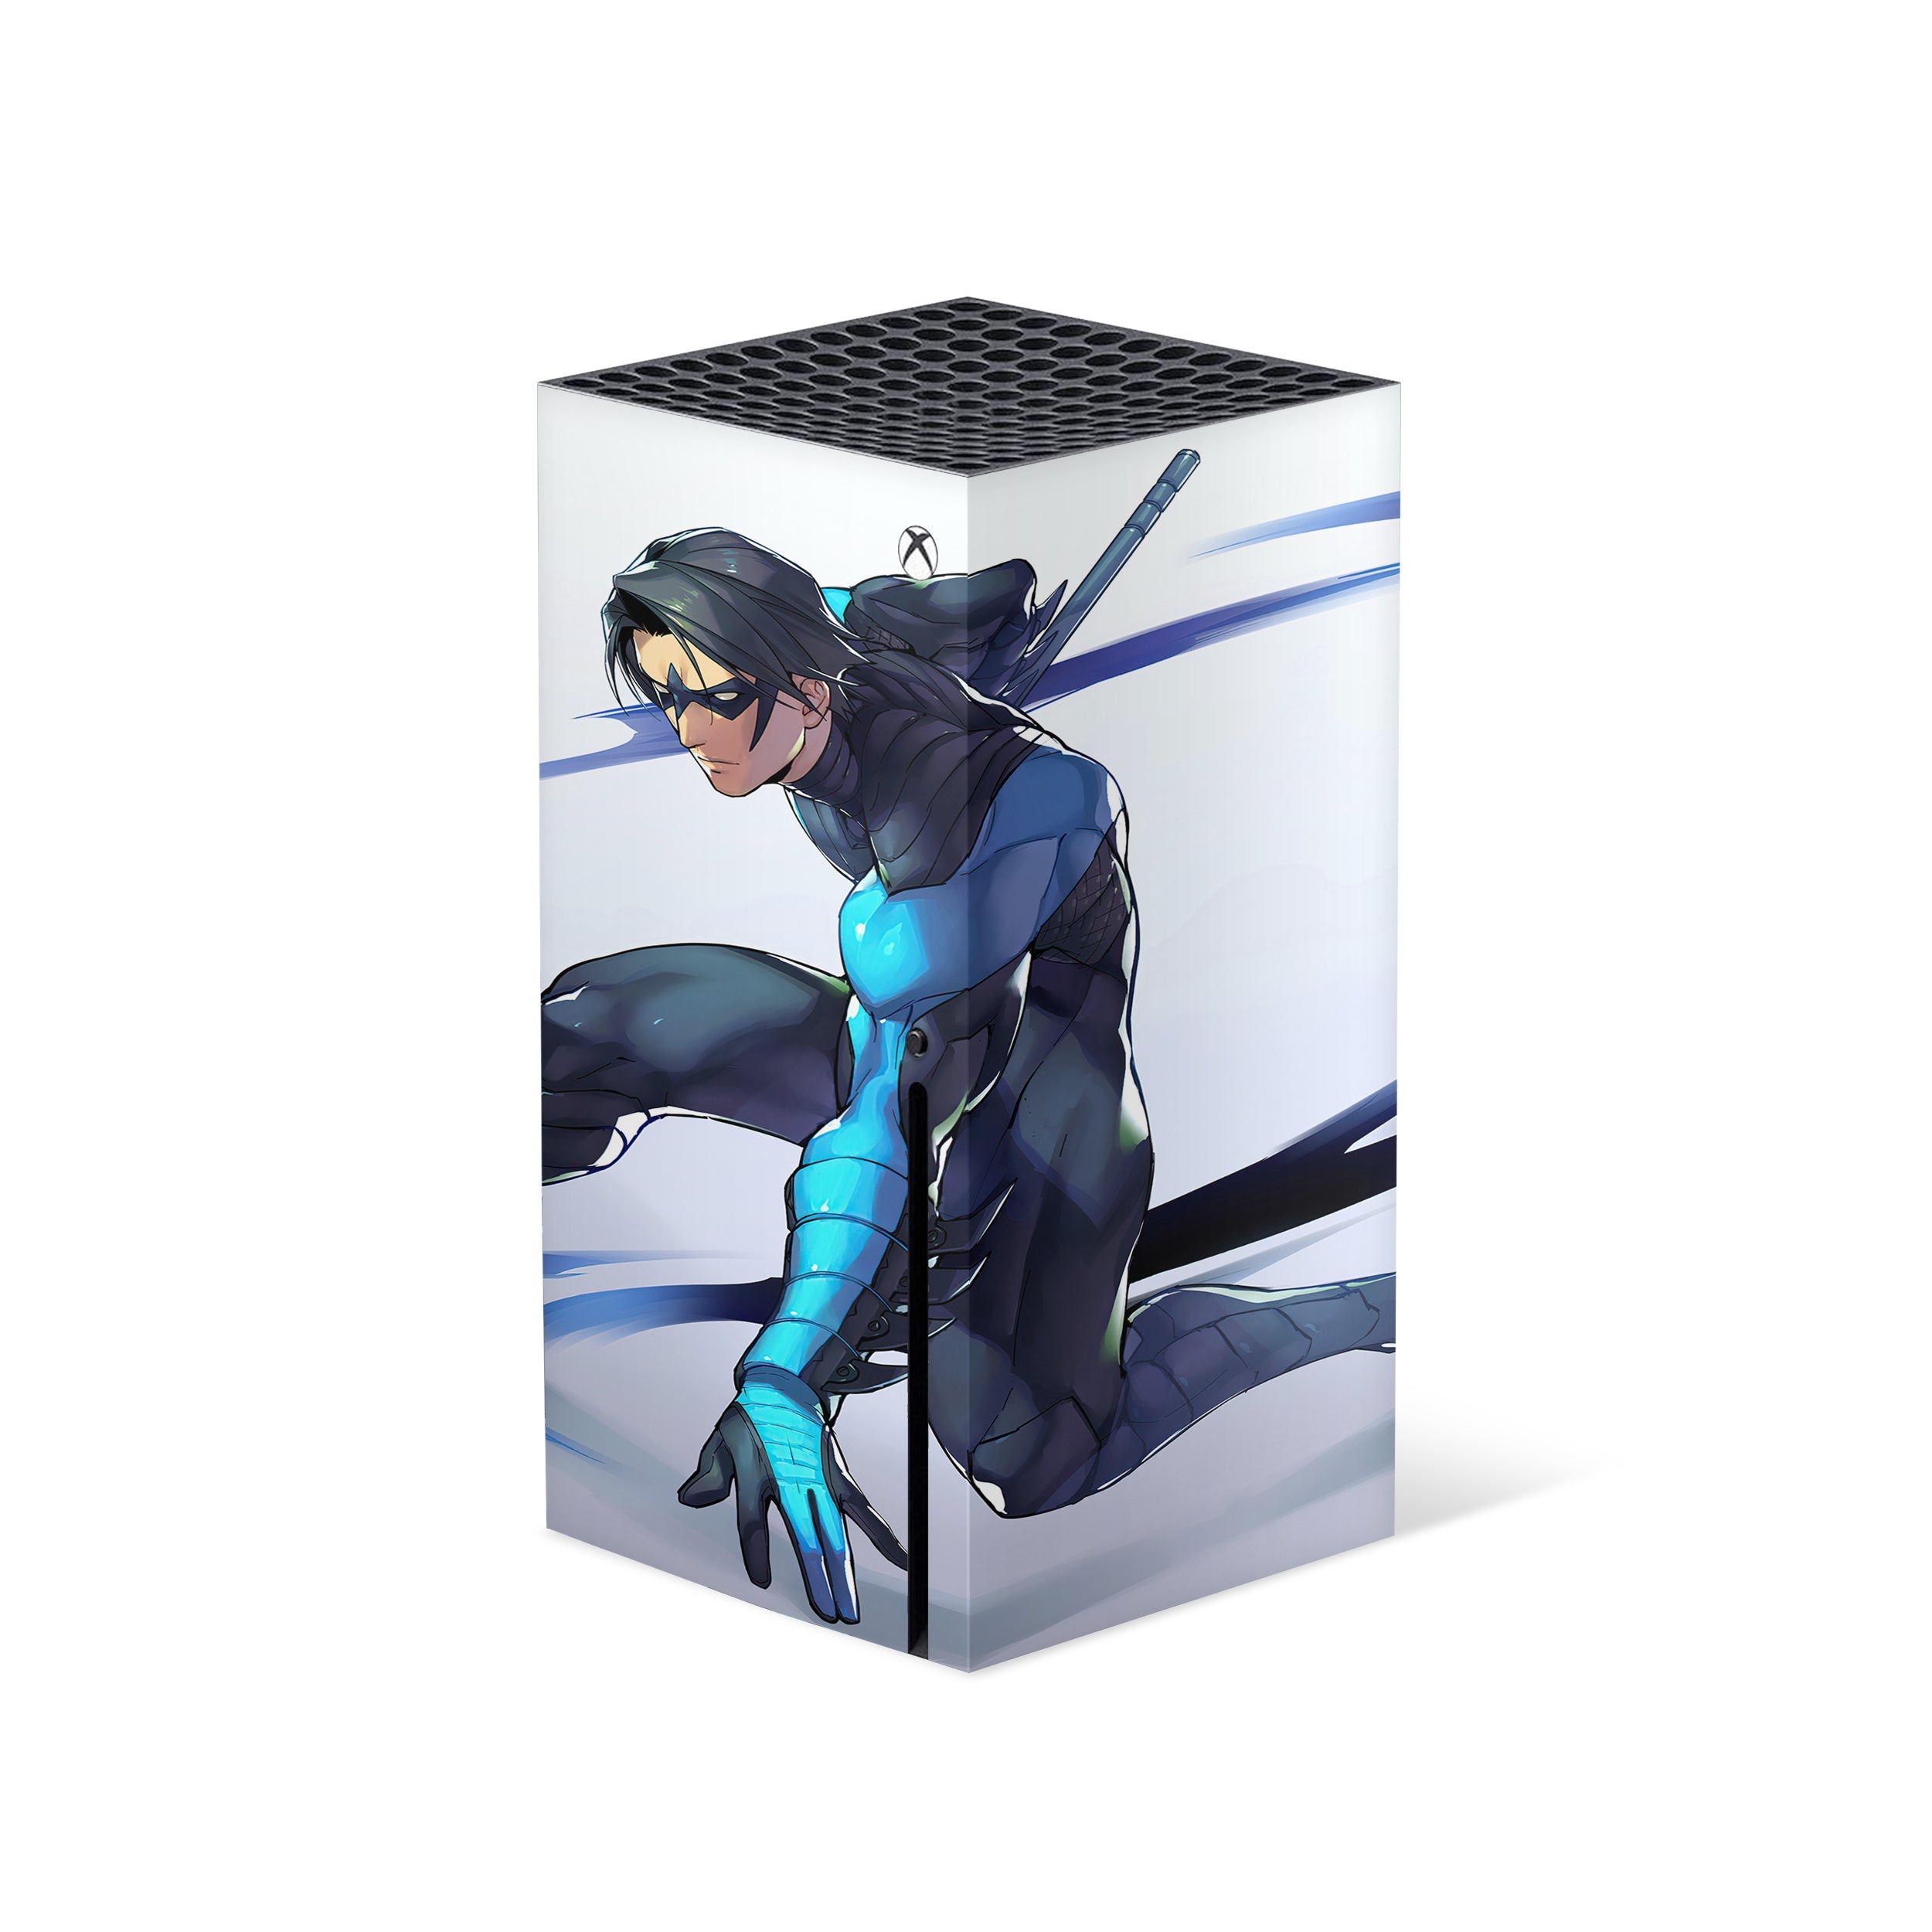 A video game skin featuring a DC Comics Nightwing design for the Xbox Series X.